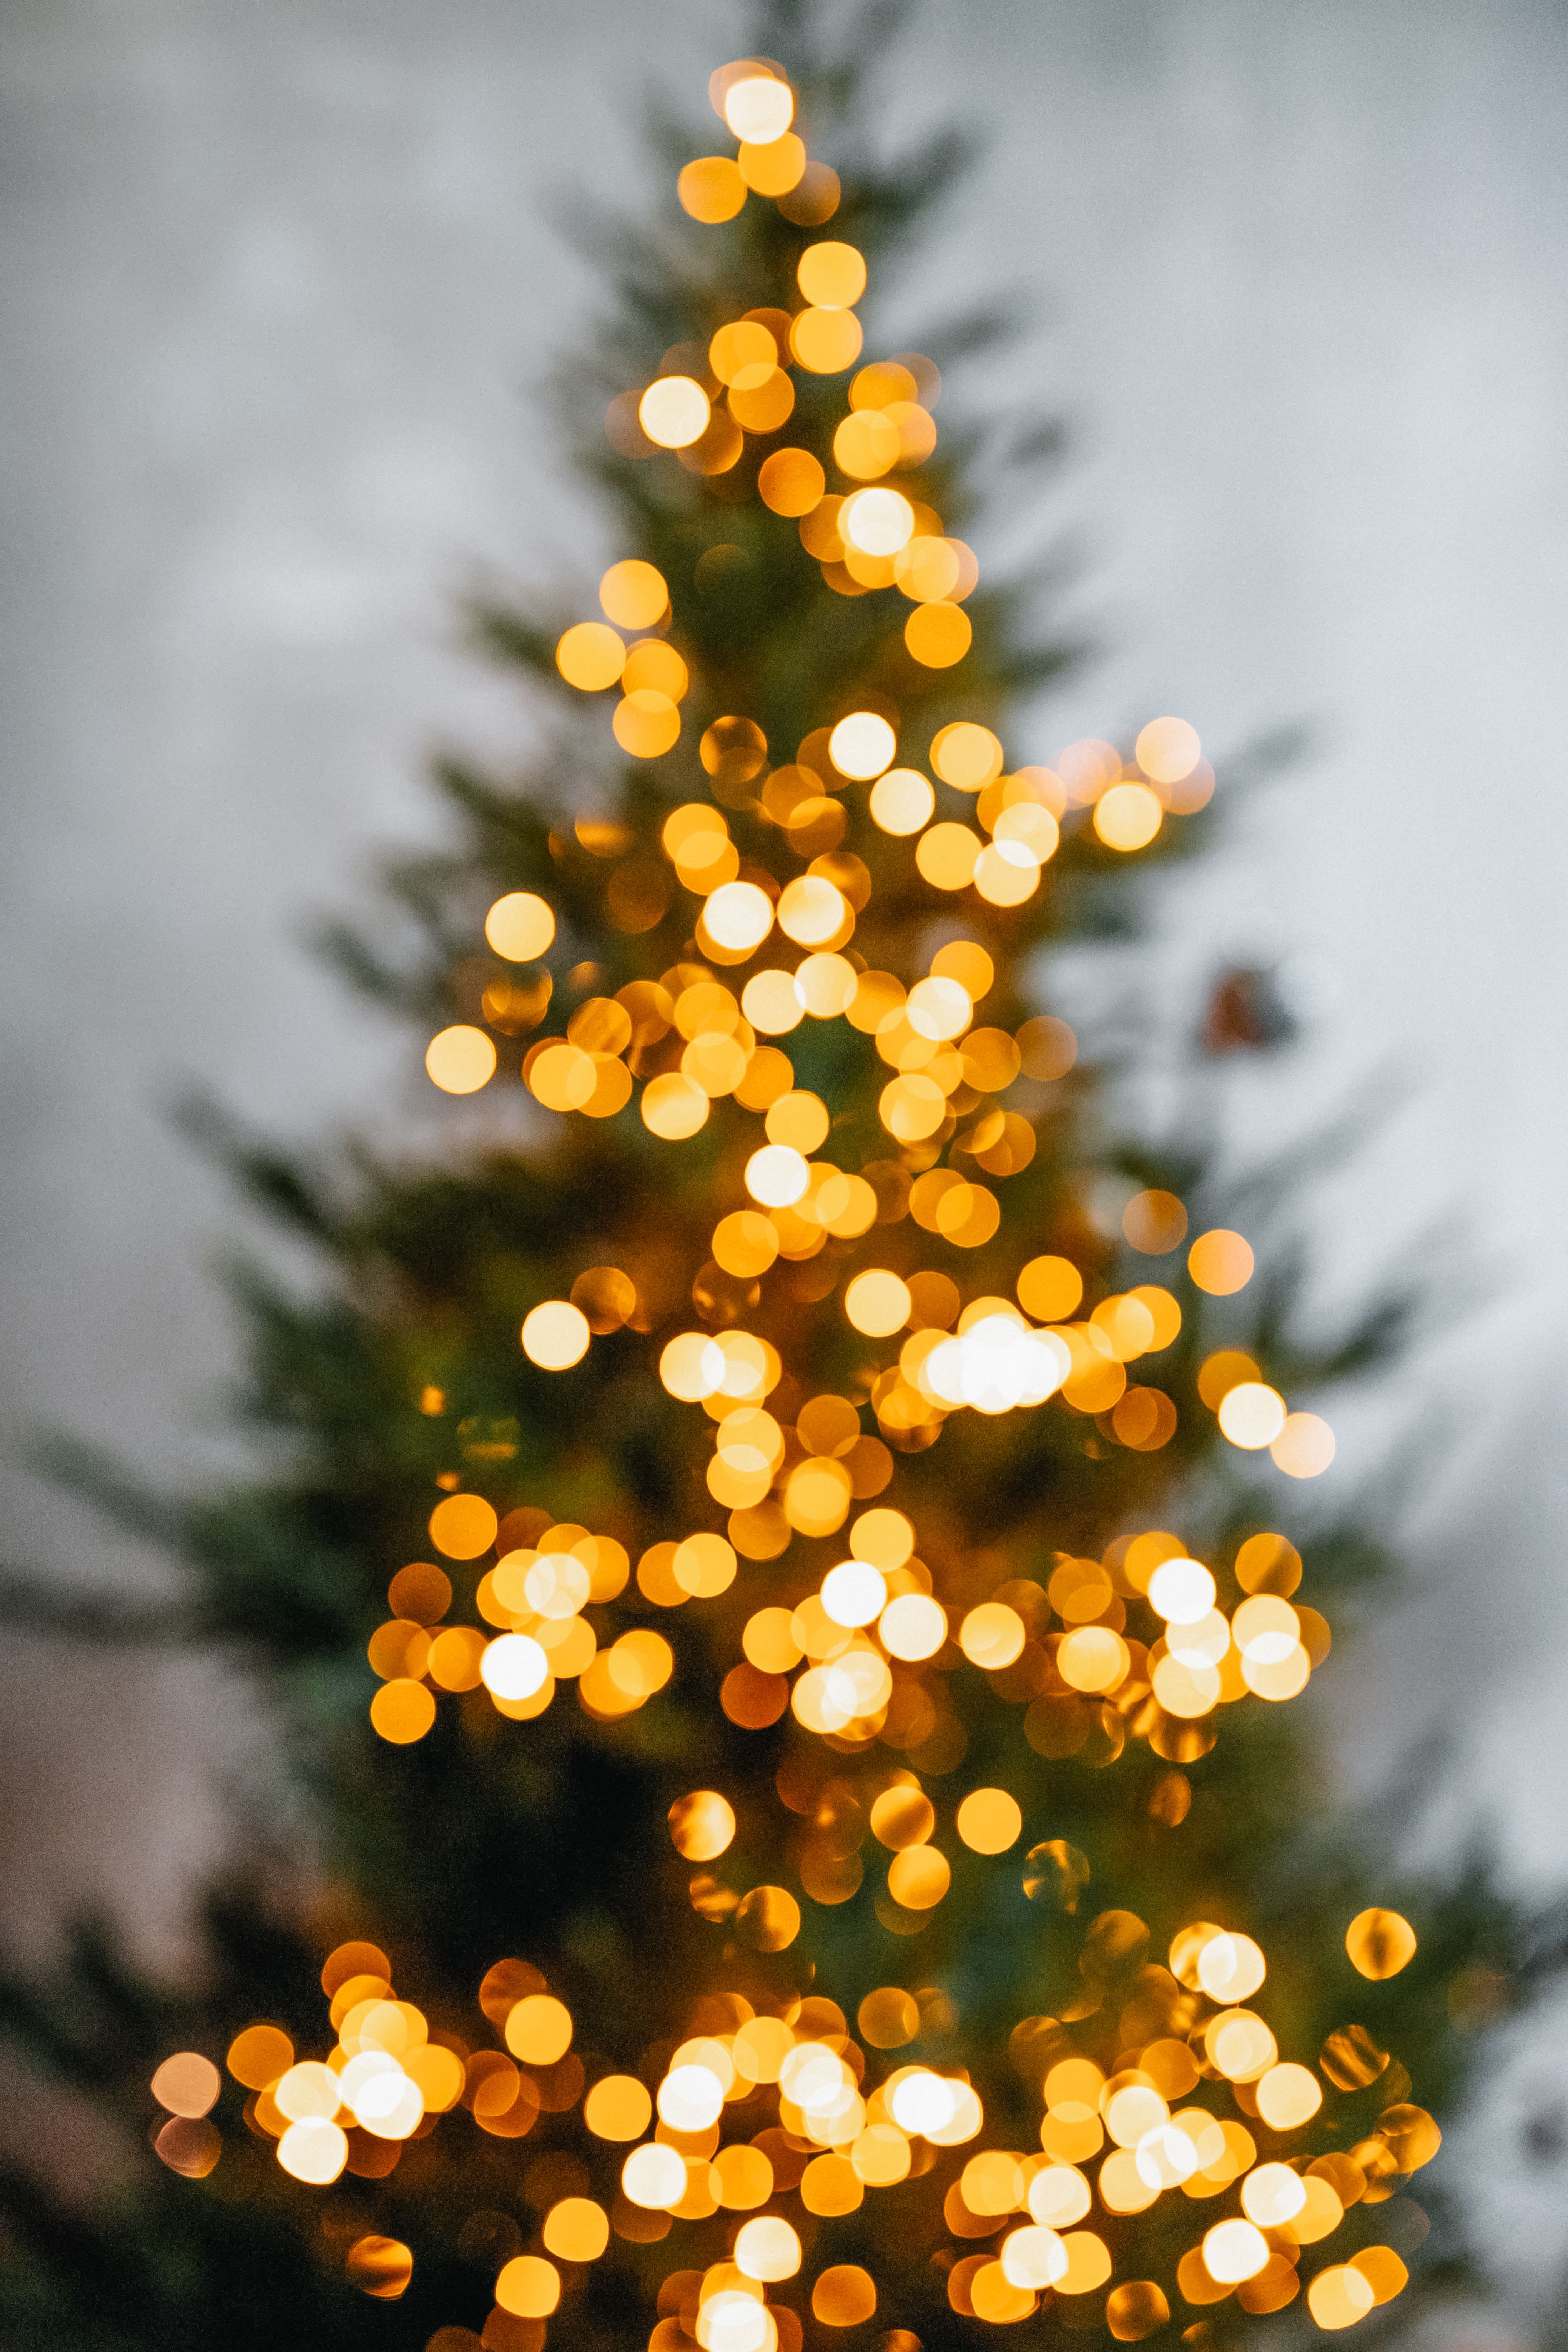 A blurry photo of a Christmas tree with golden lights. - Christmas lights